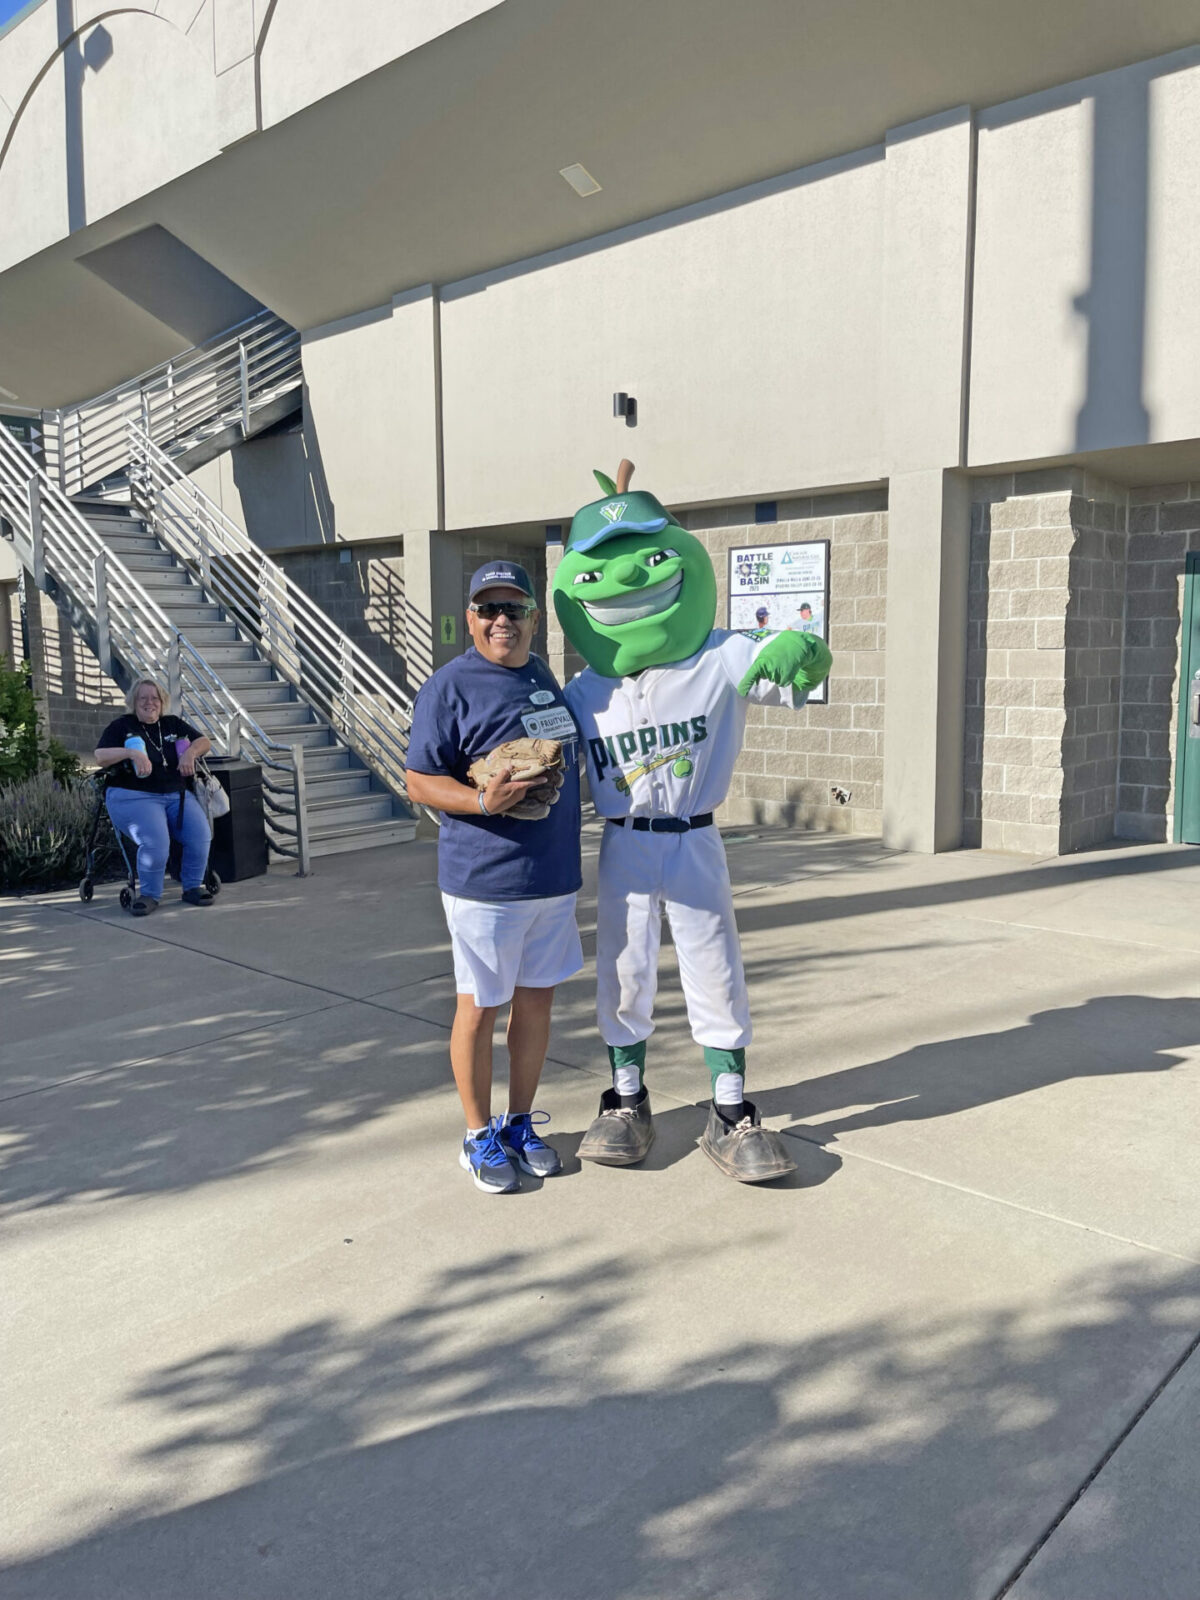 Northwest Harvest employee poses next to Pippins mascot